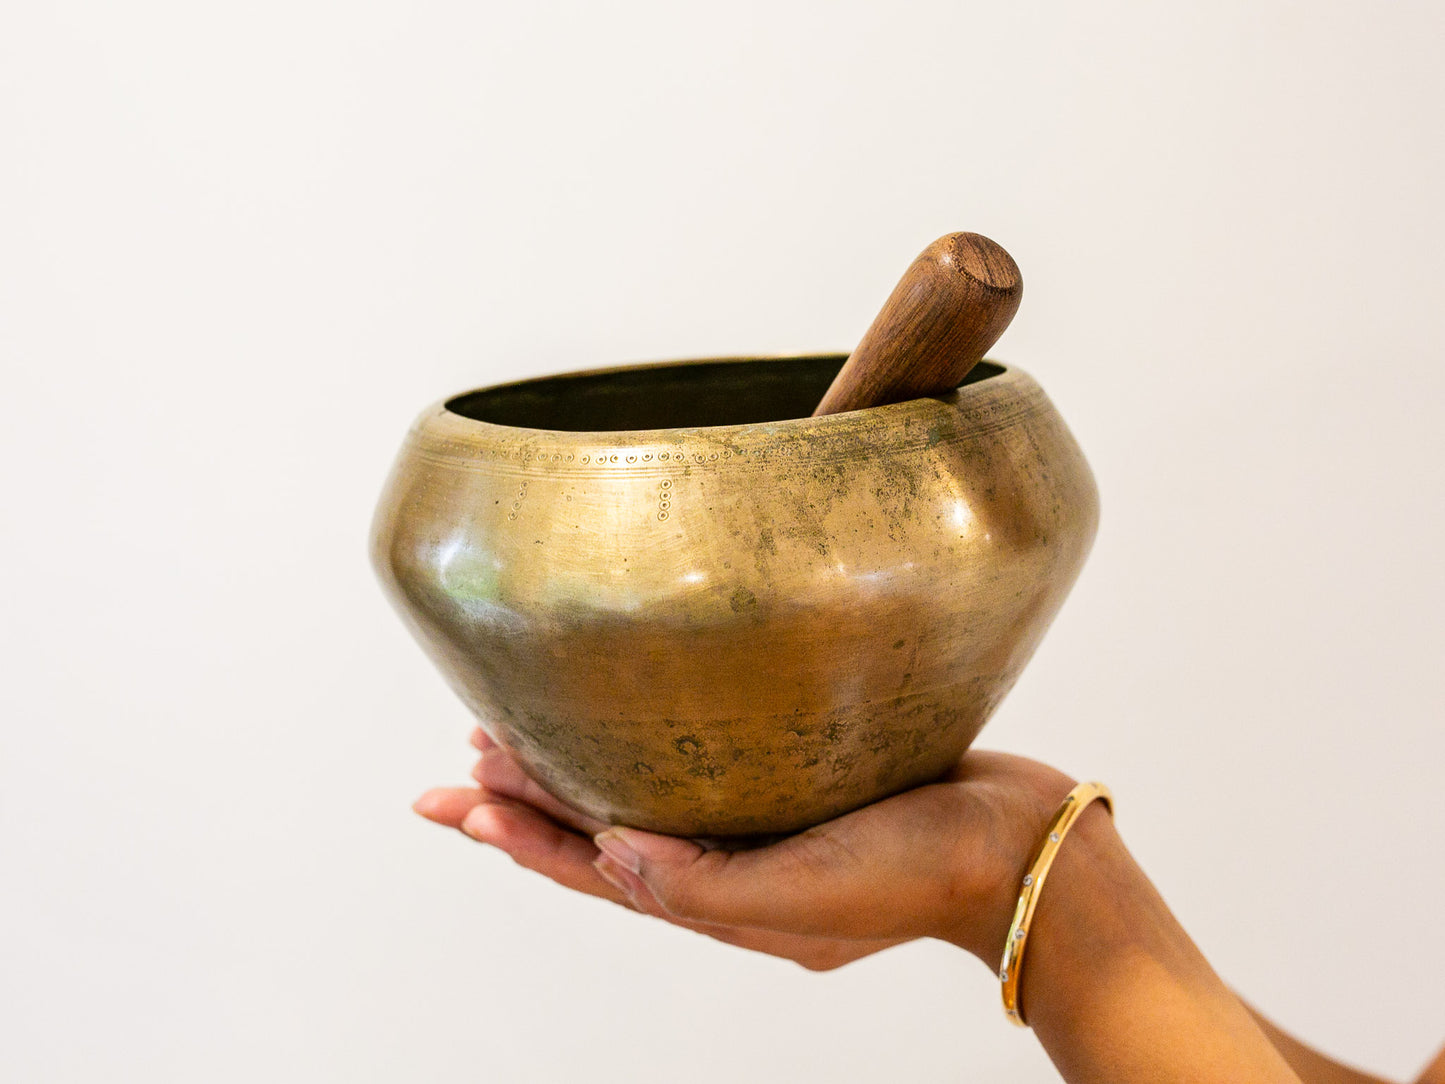 Collector's Buddha Singing Bowl - Base Note F4 (348 Hz)